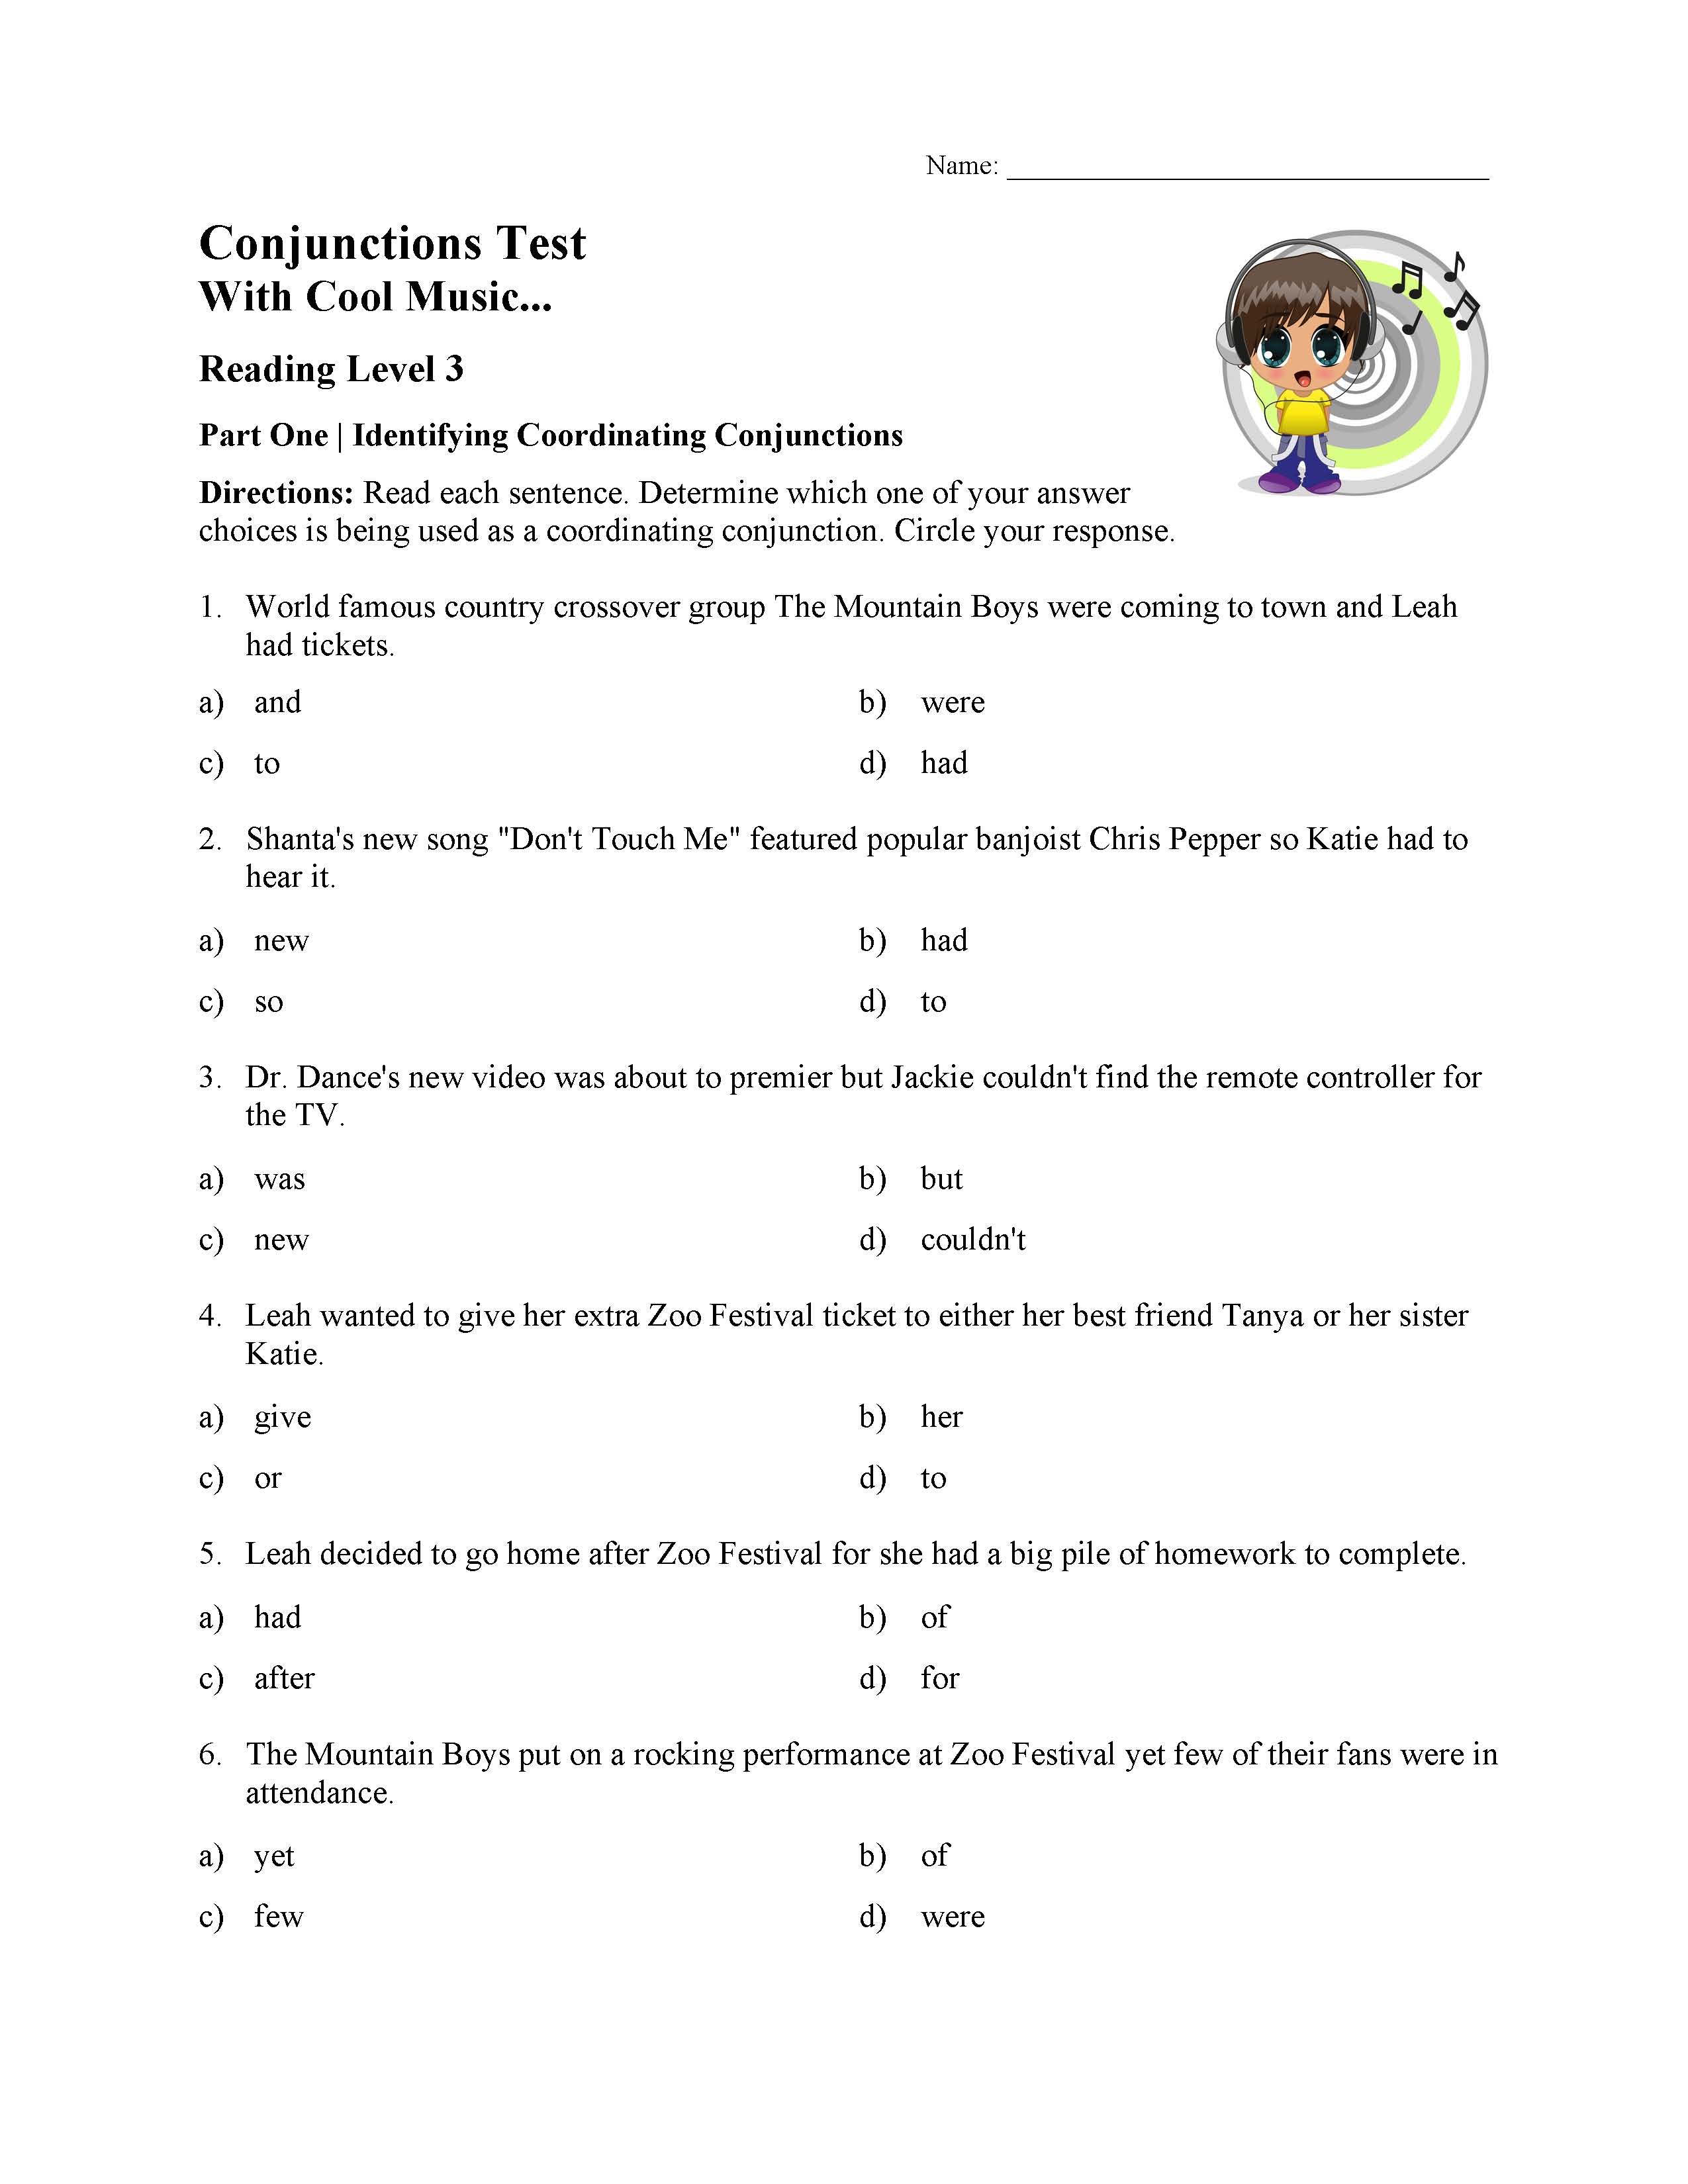 This is a preview image of the Conjunctions Test - Reading Level 3.